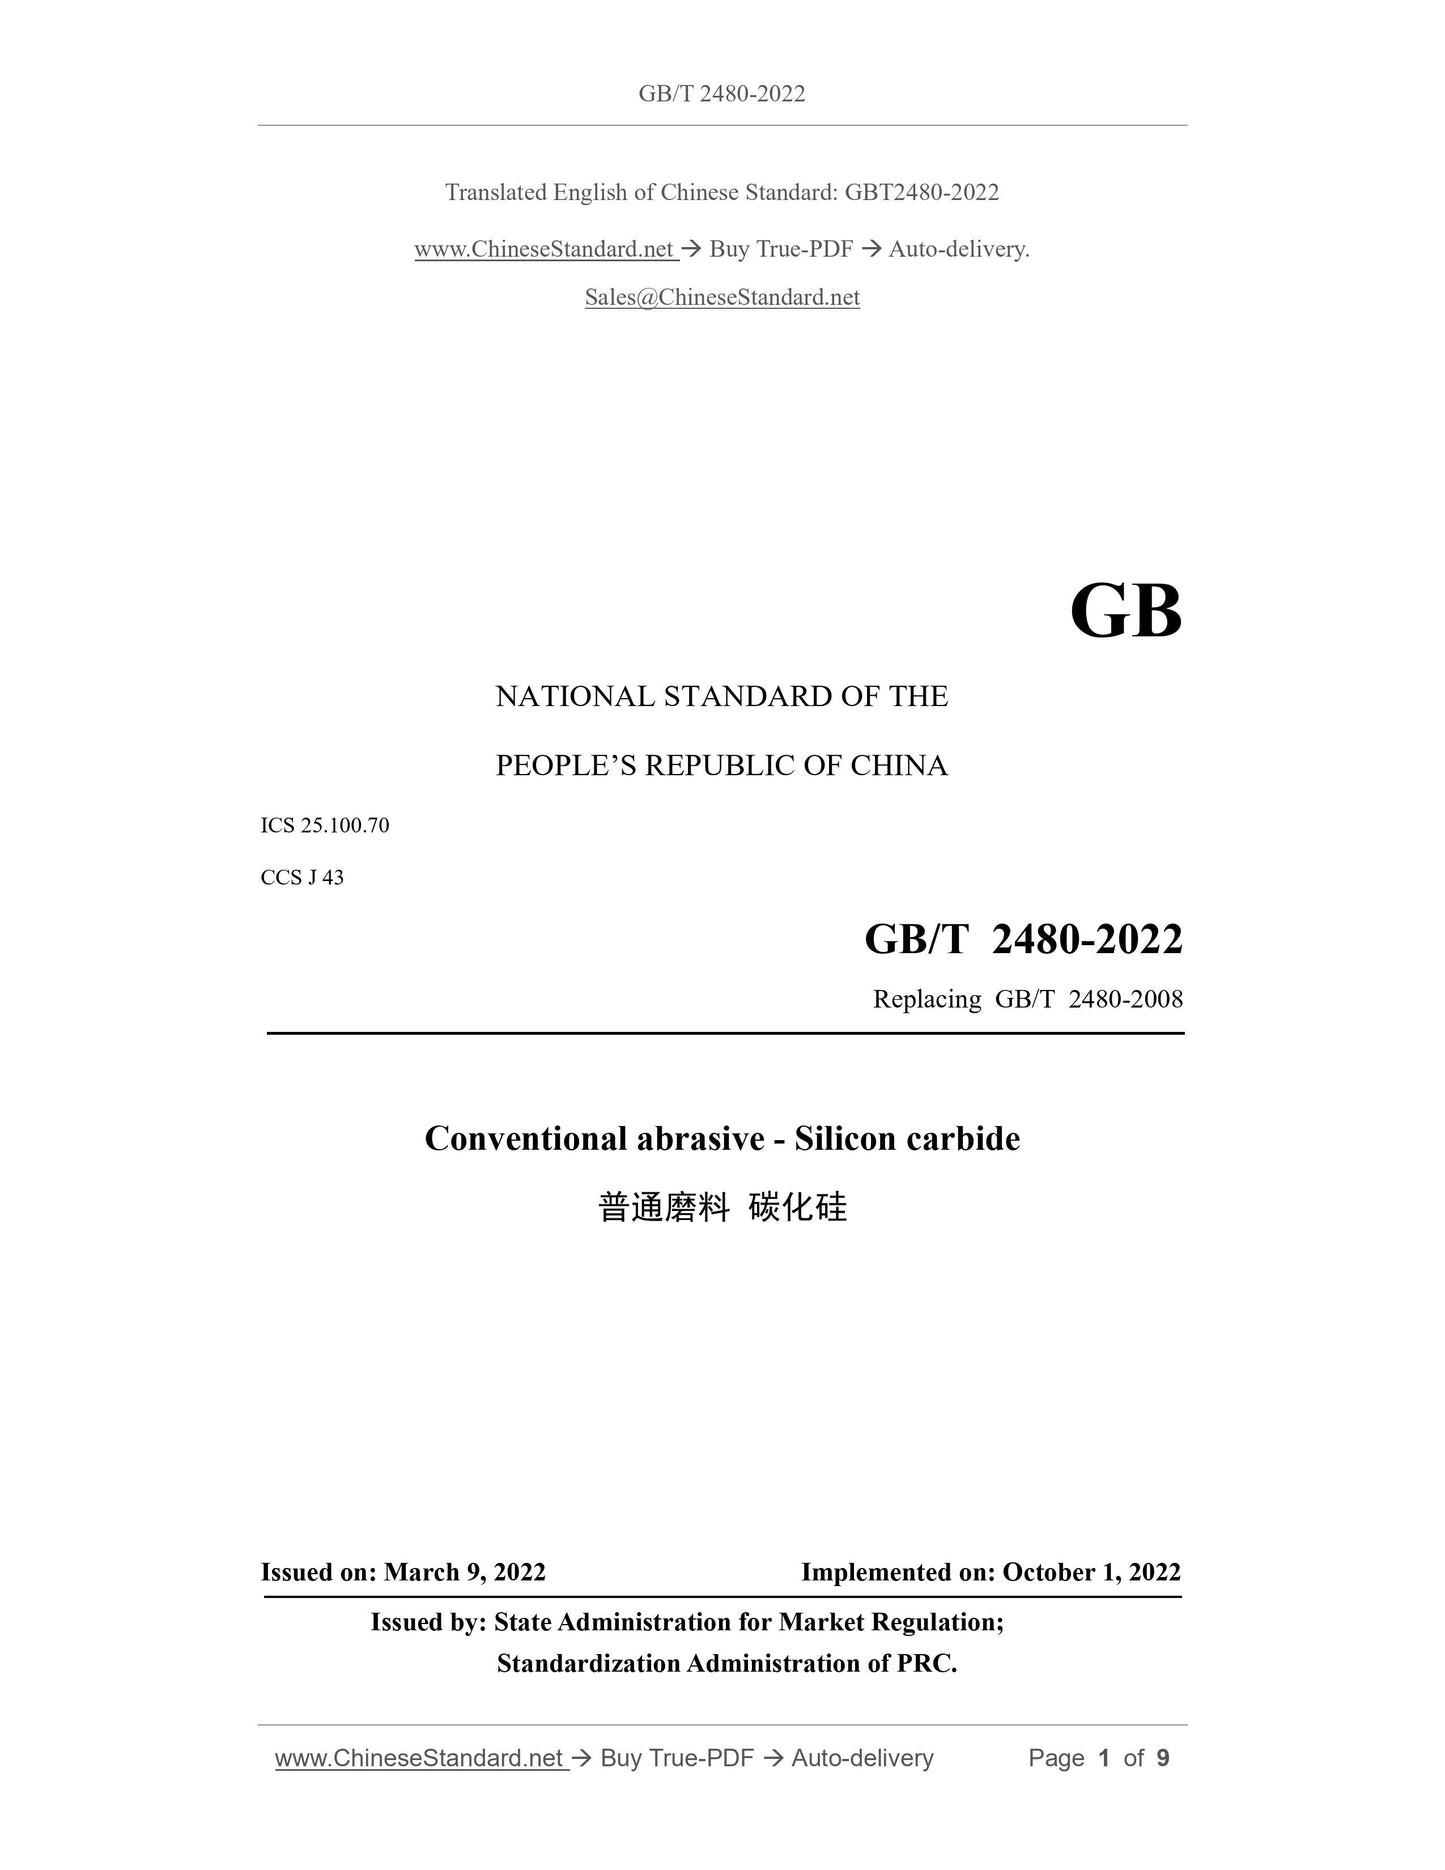 GB/T 2480-2022 Page 1